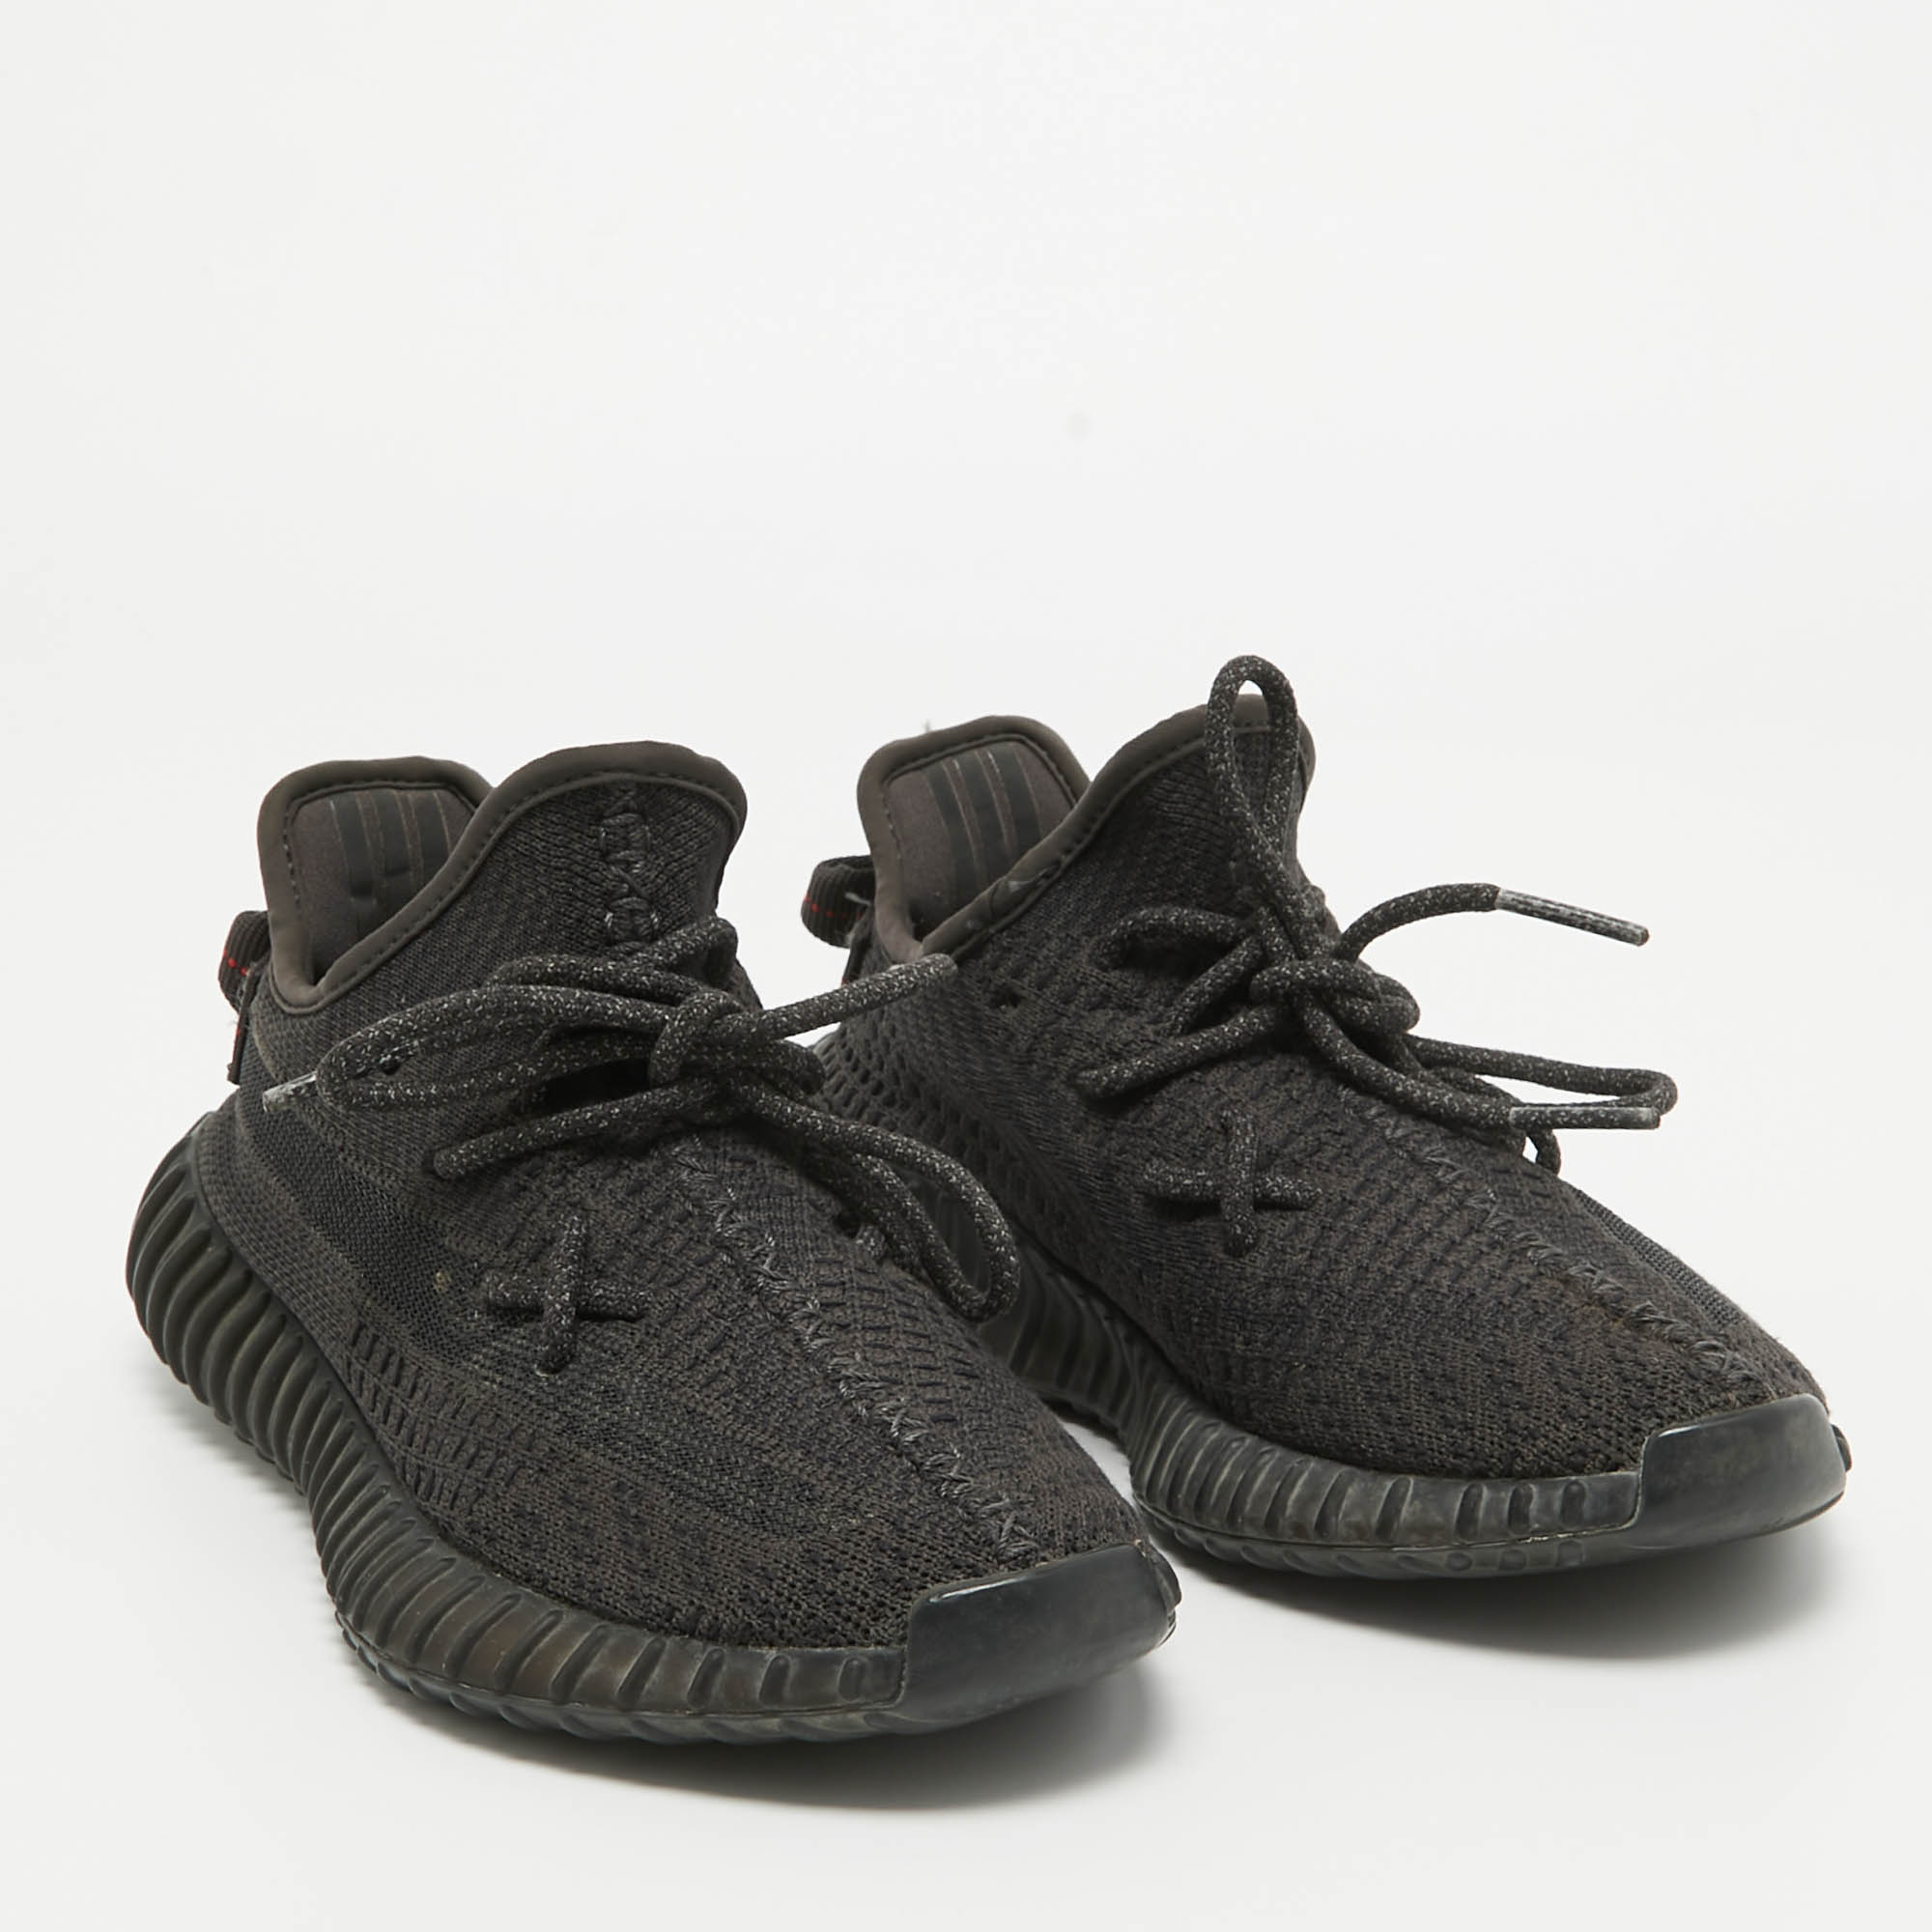 Yeezy X Adidas Black Knit Fabric Boost 350 V2 Black Sneakers Size 37 1/3